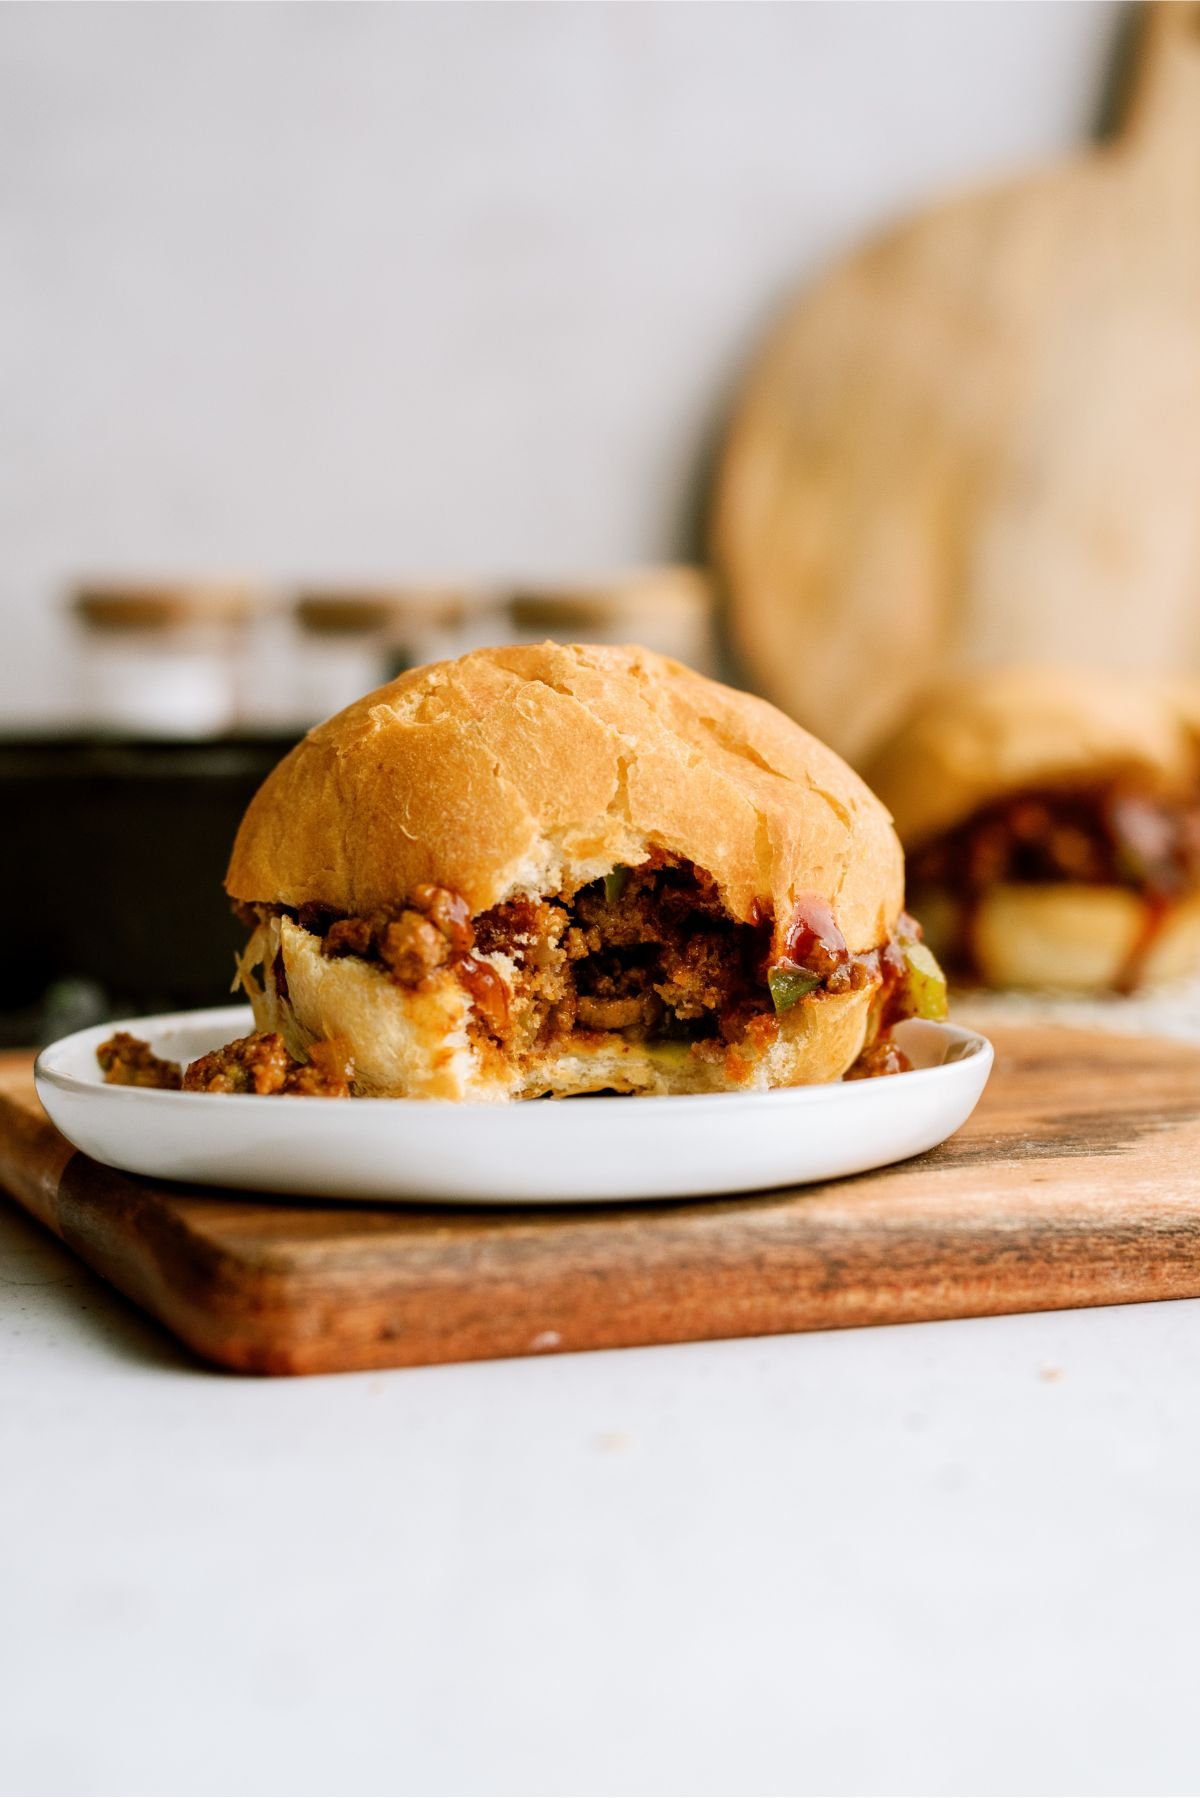 BBQ Sloppy Joes sandwich with a bite taken out of it